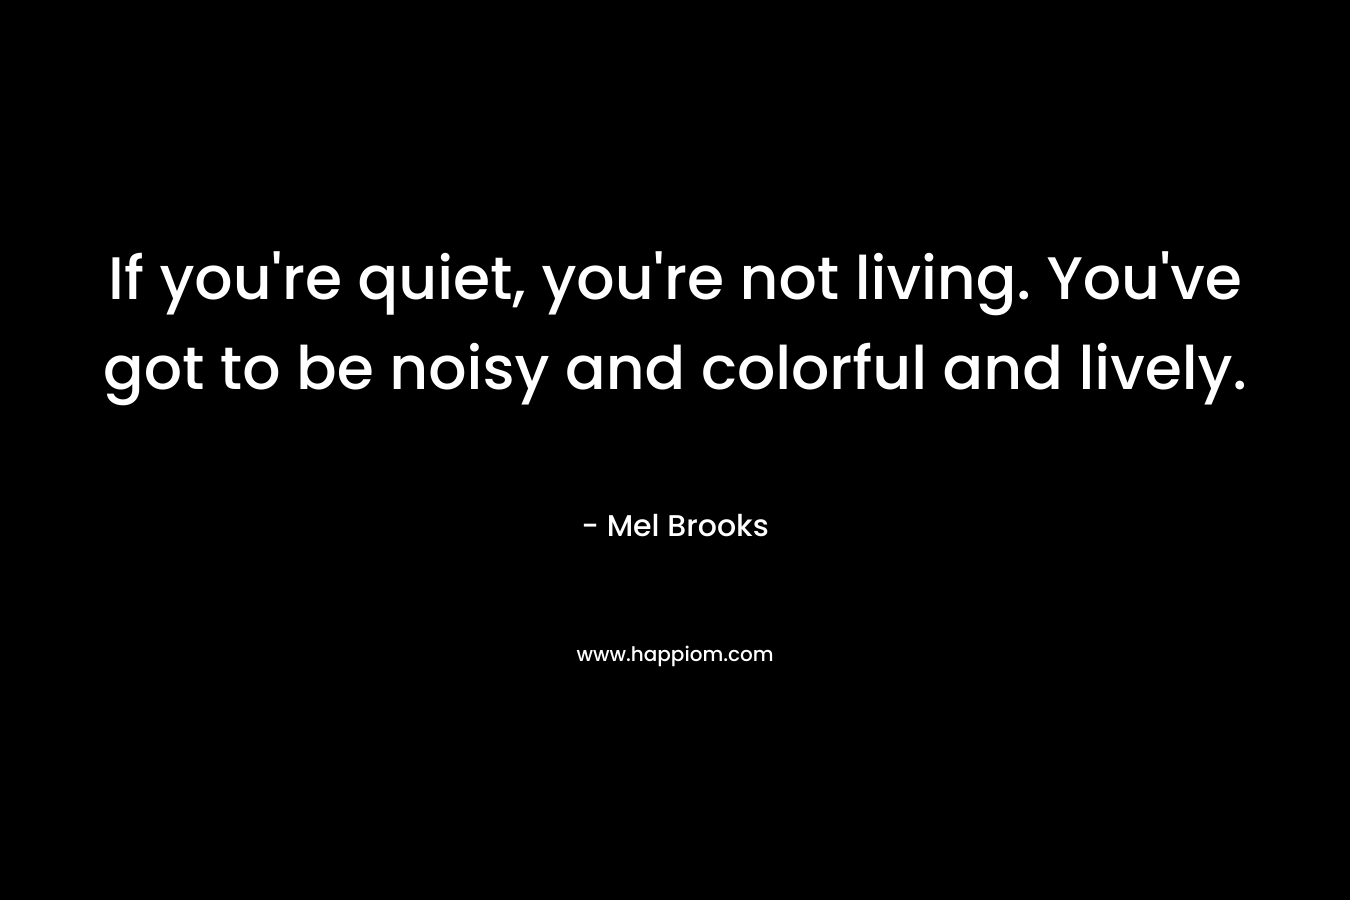 If you’re quiet, you’re not living. You’ve got to be noisy and colorful and lively. – Mel Brooks